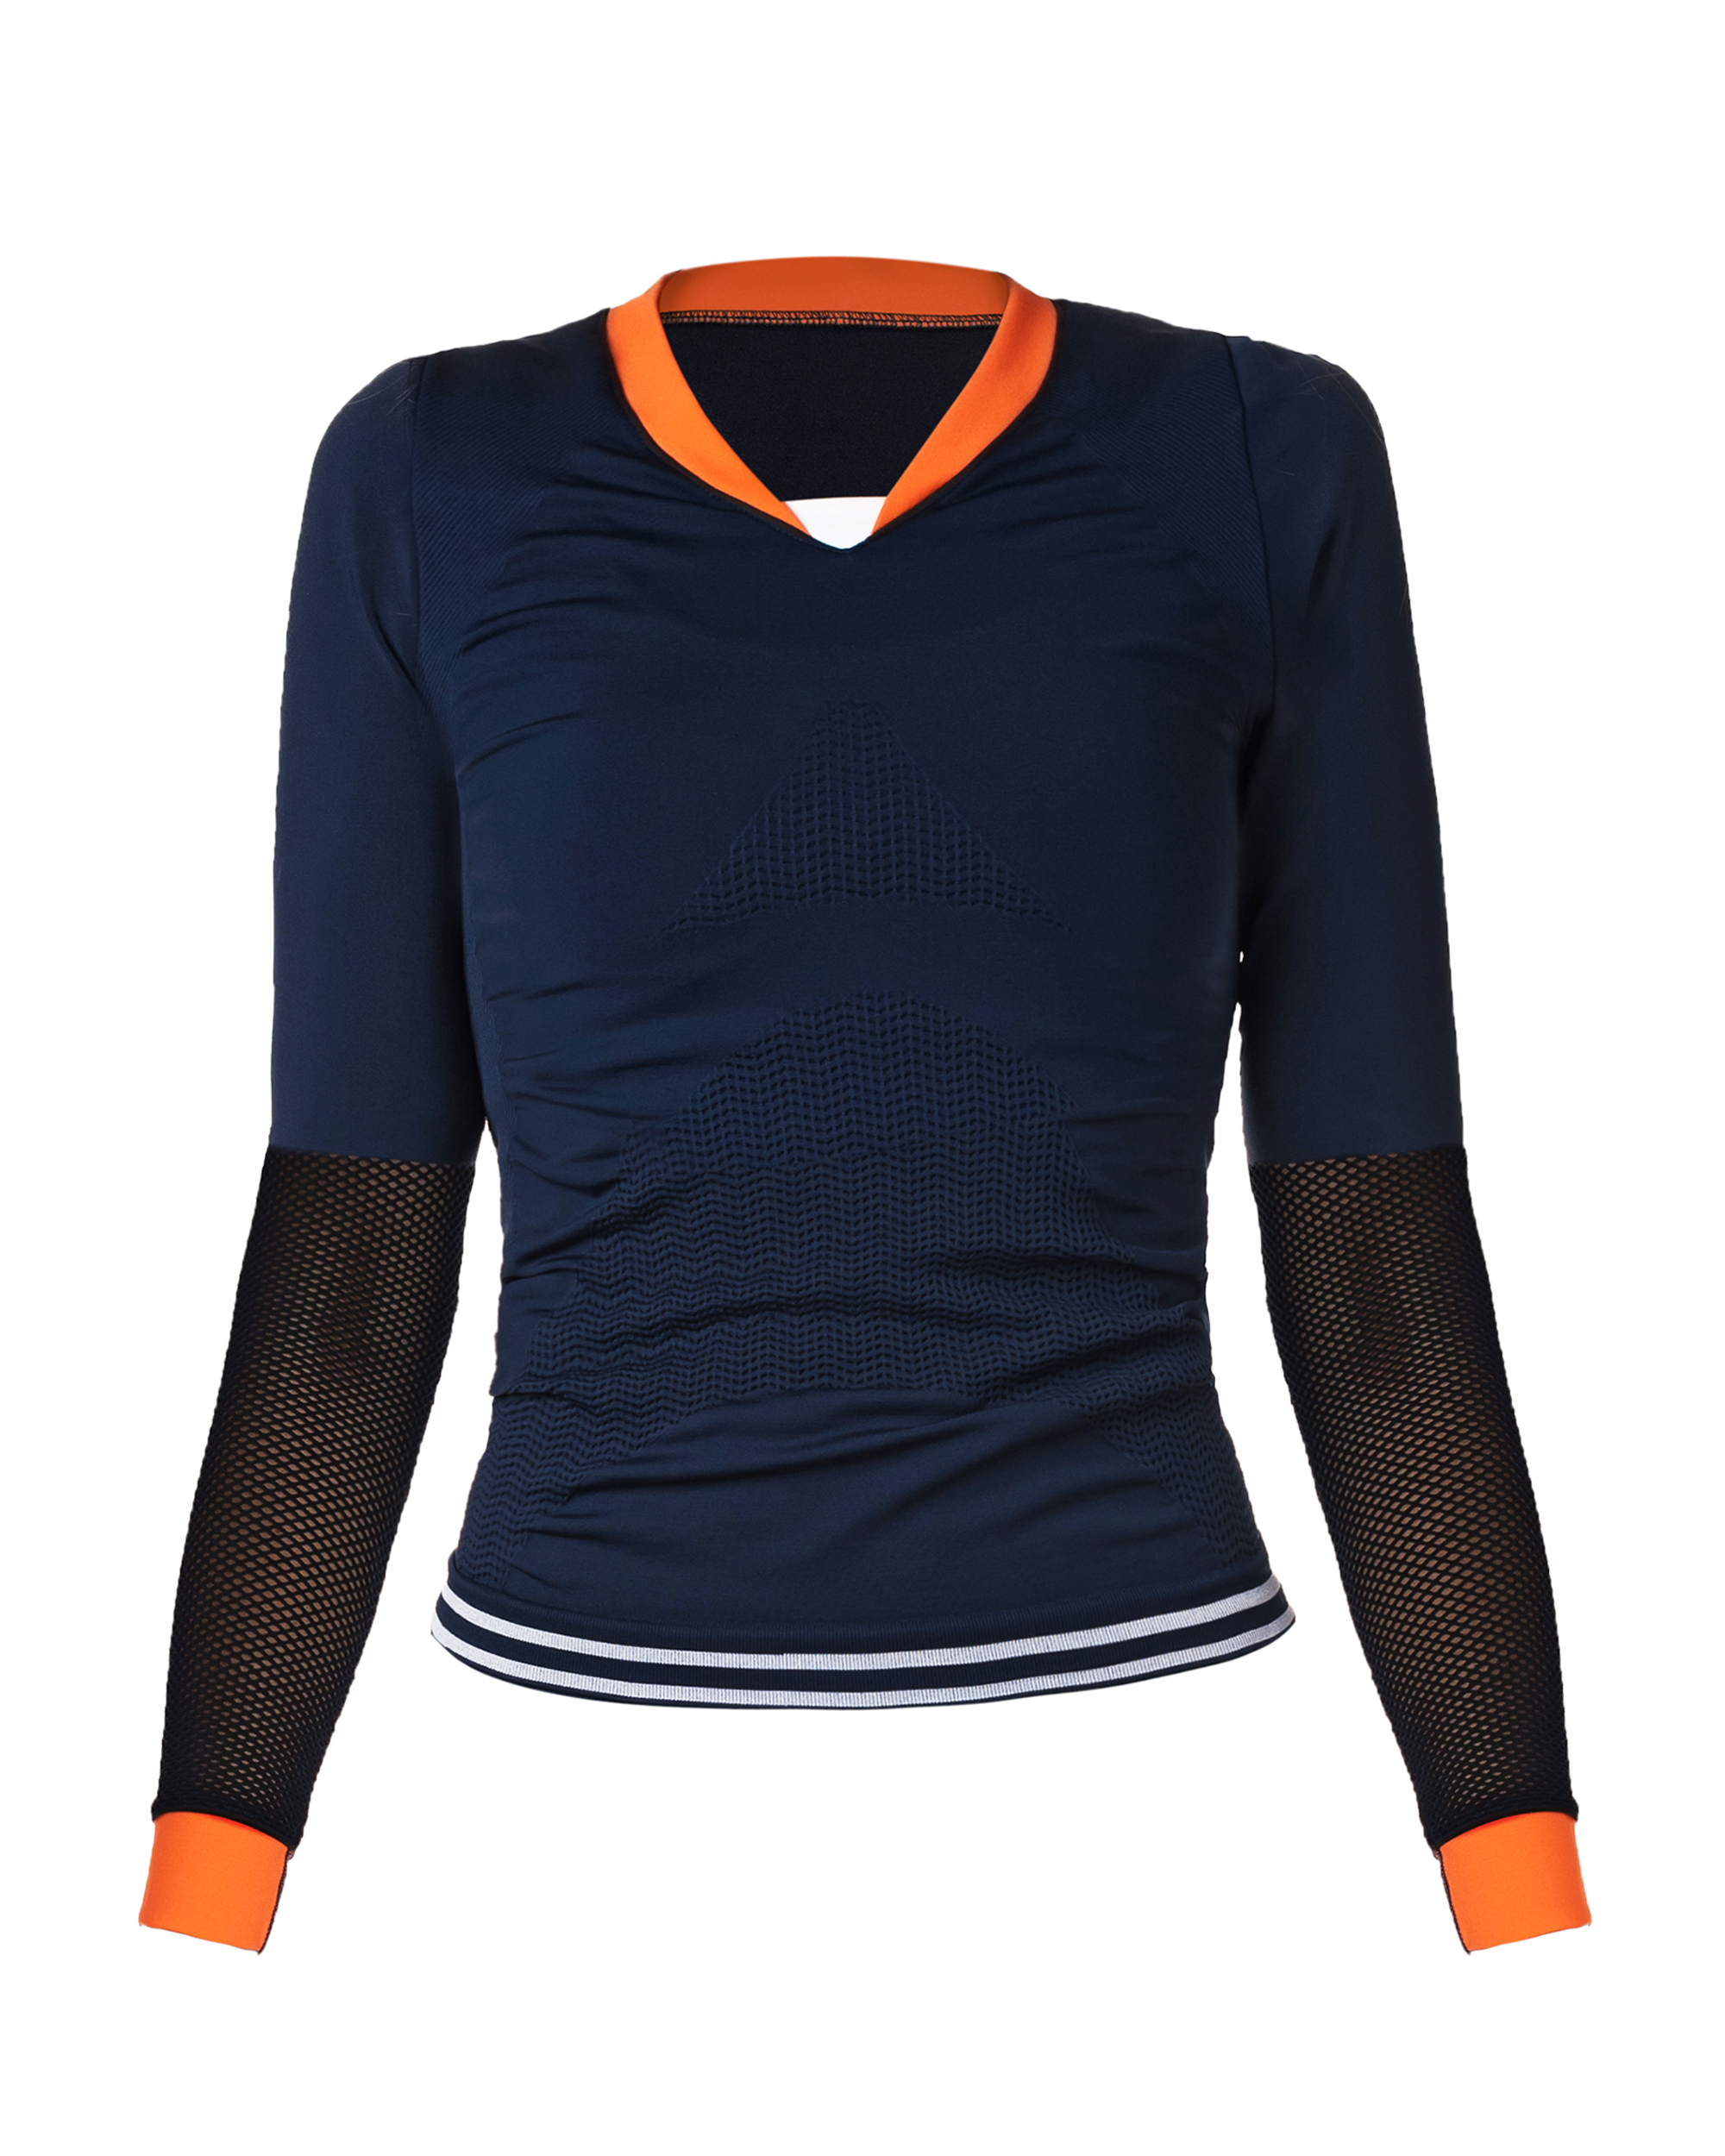 SPORTS TOP SEAMLESS NAVY SPORTS BRAS AND TOPS CE IDAWEN - Woman